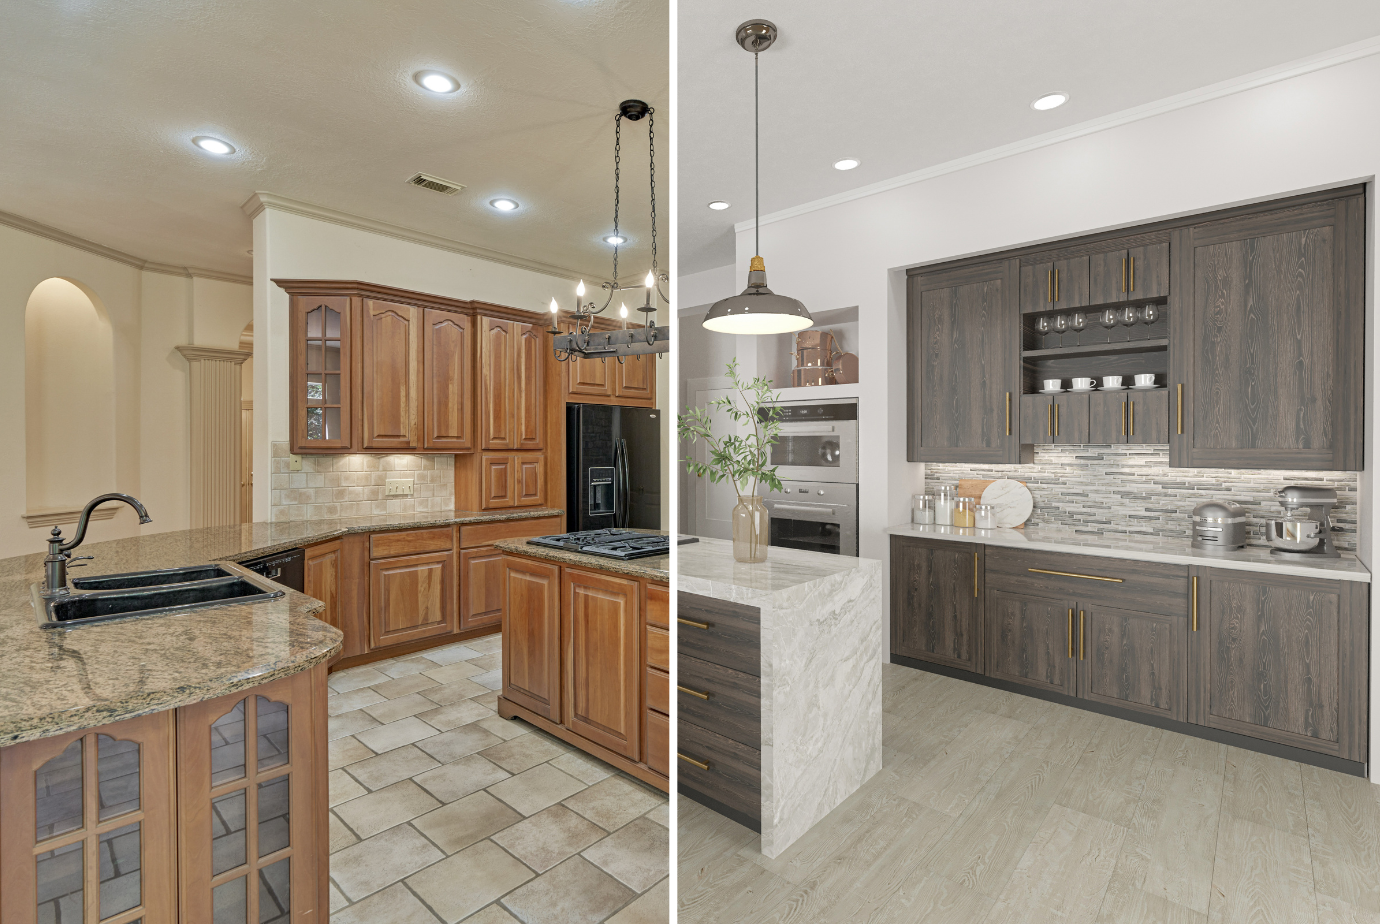 split screen image of a kitchen before and after a virtual remodel